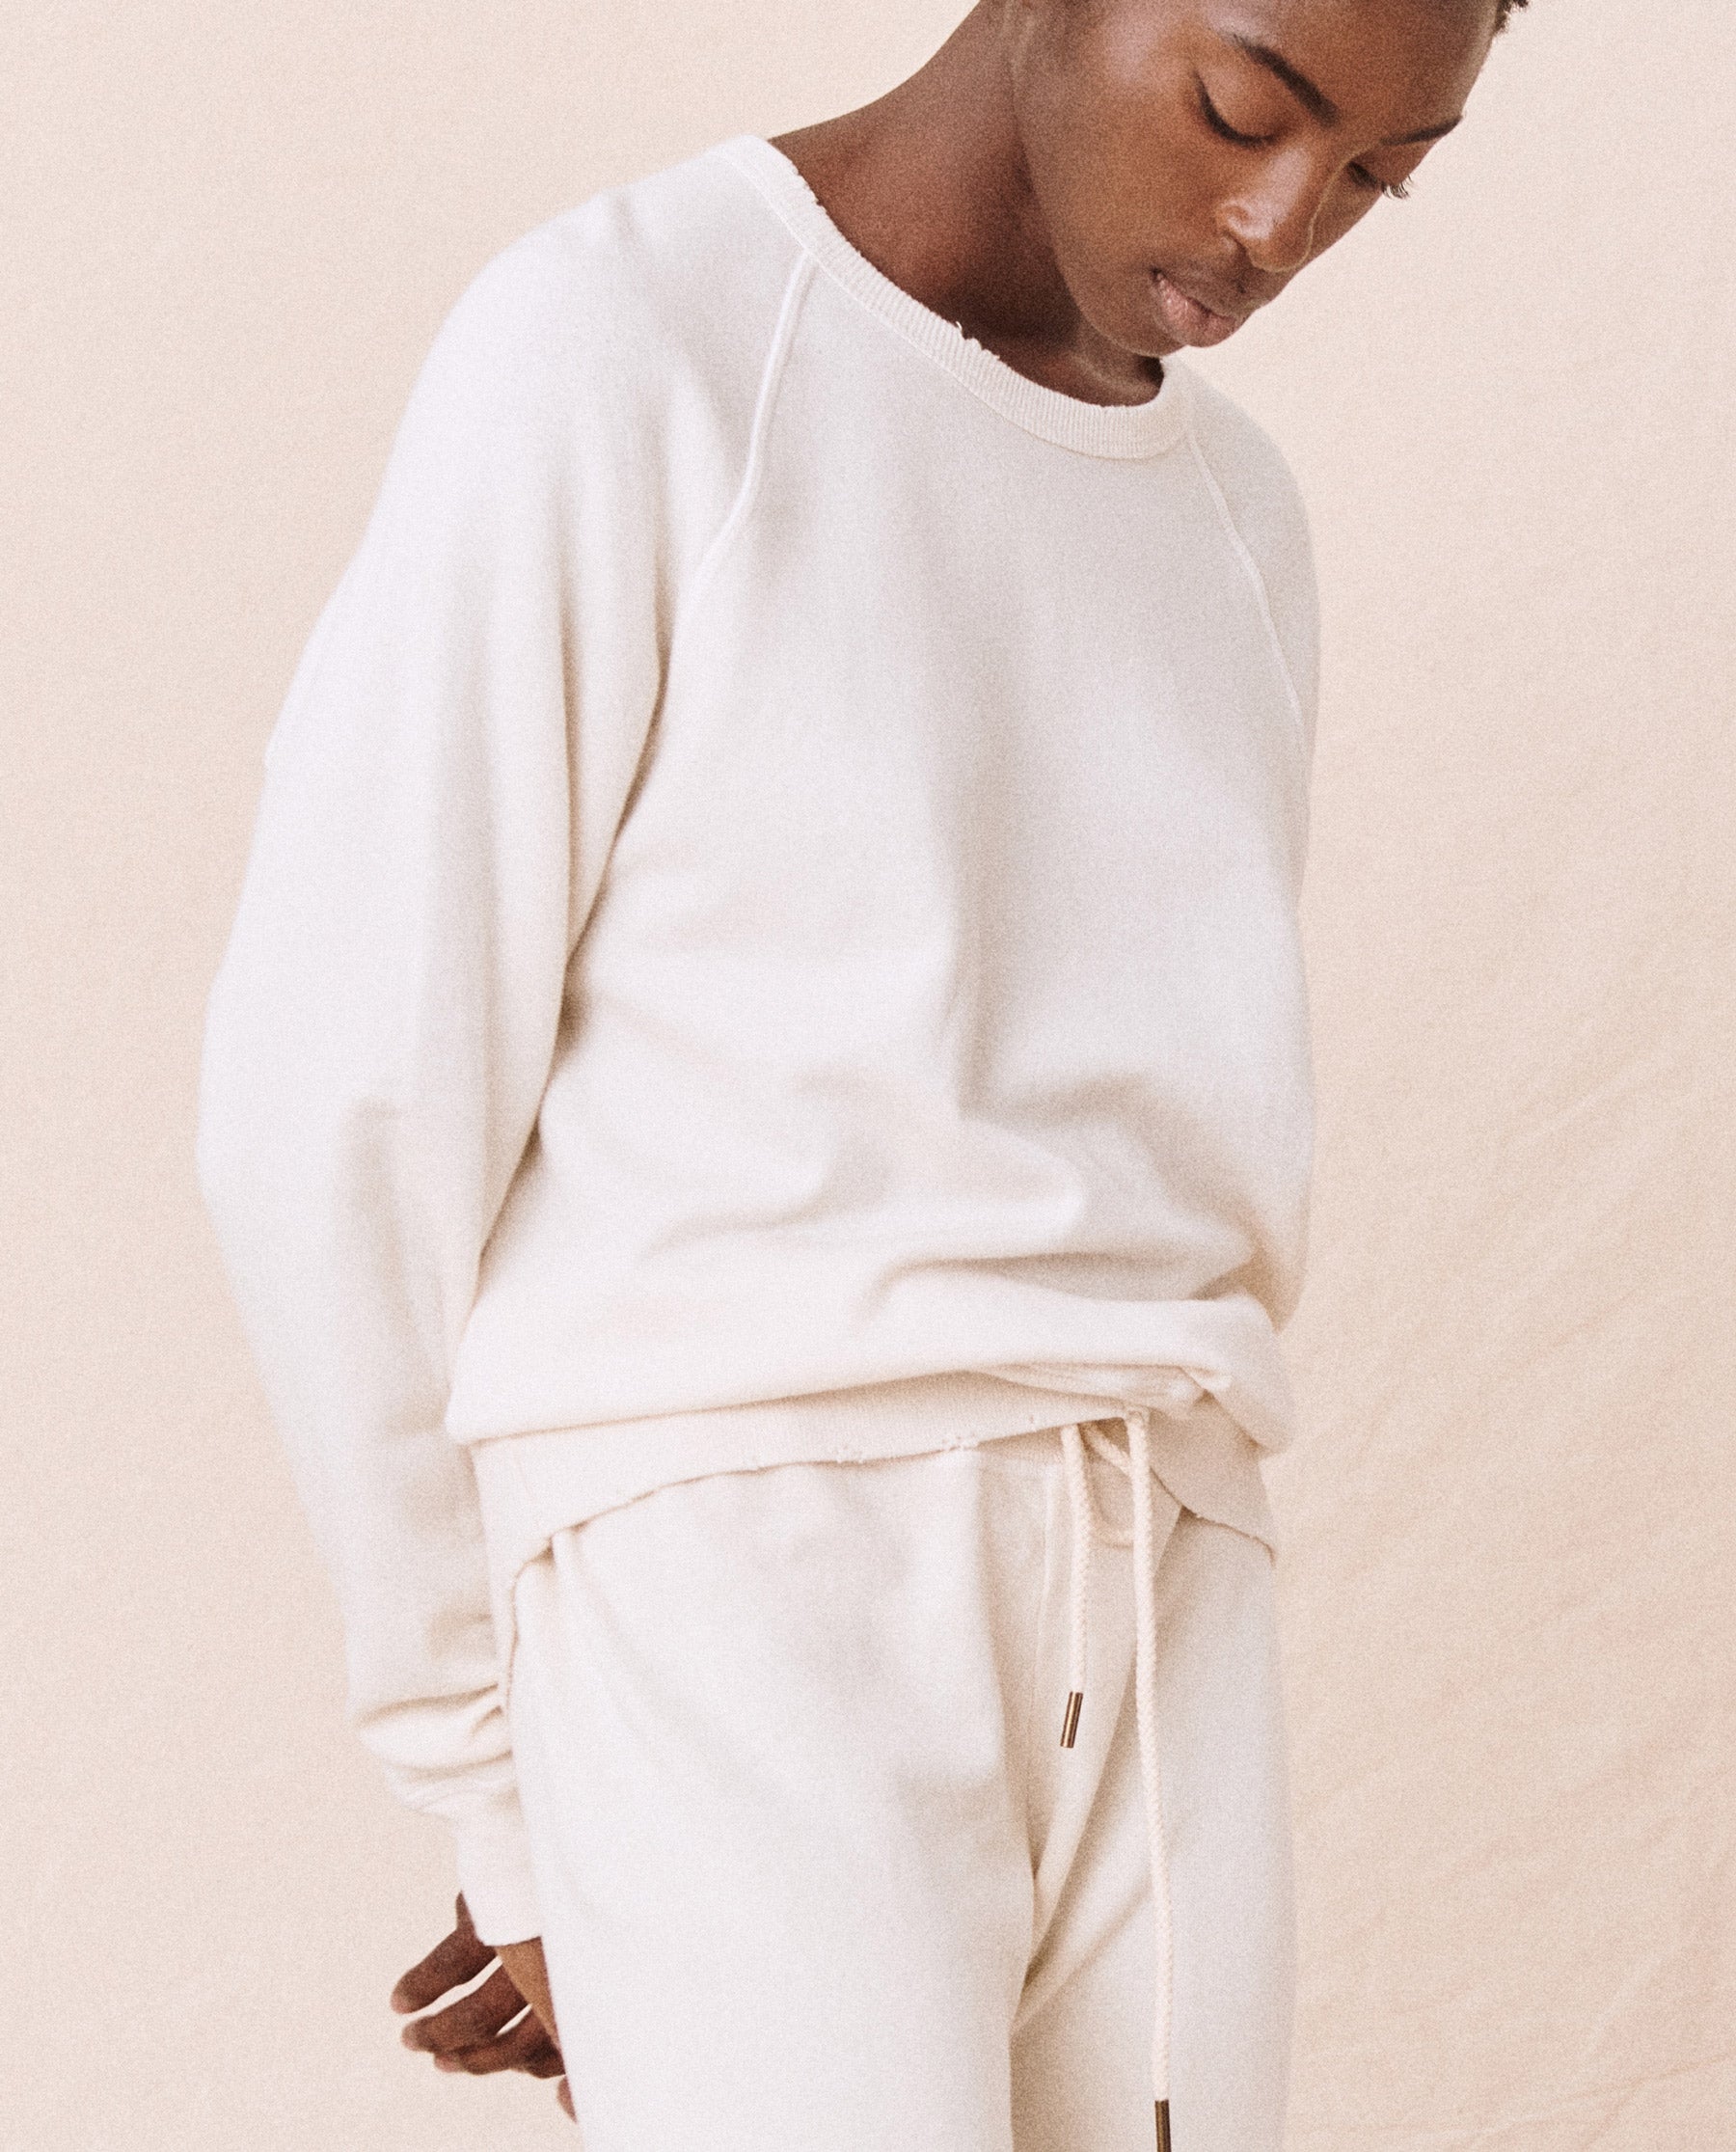 The College Sweatshirt. Solid -- Washed White SWEATSHIRTS THE GREAT. CORE KNITS